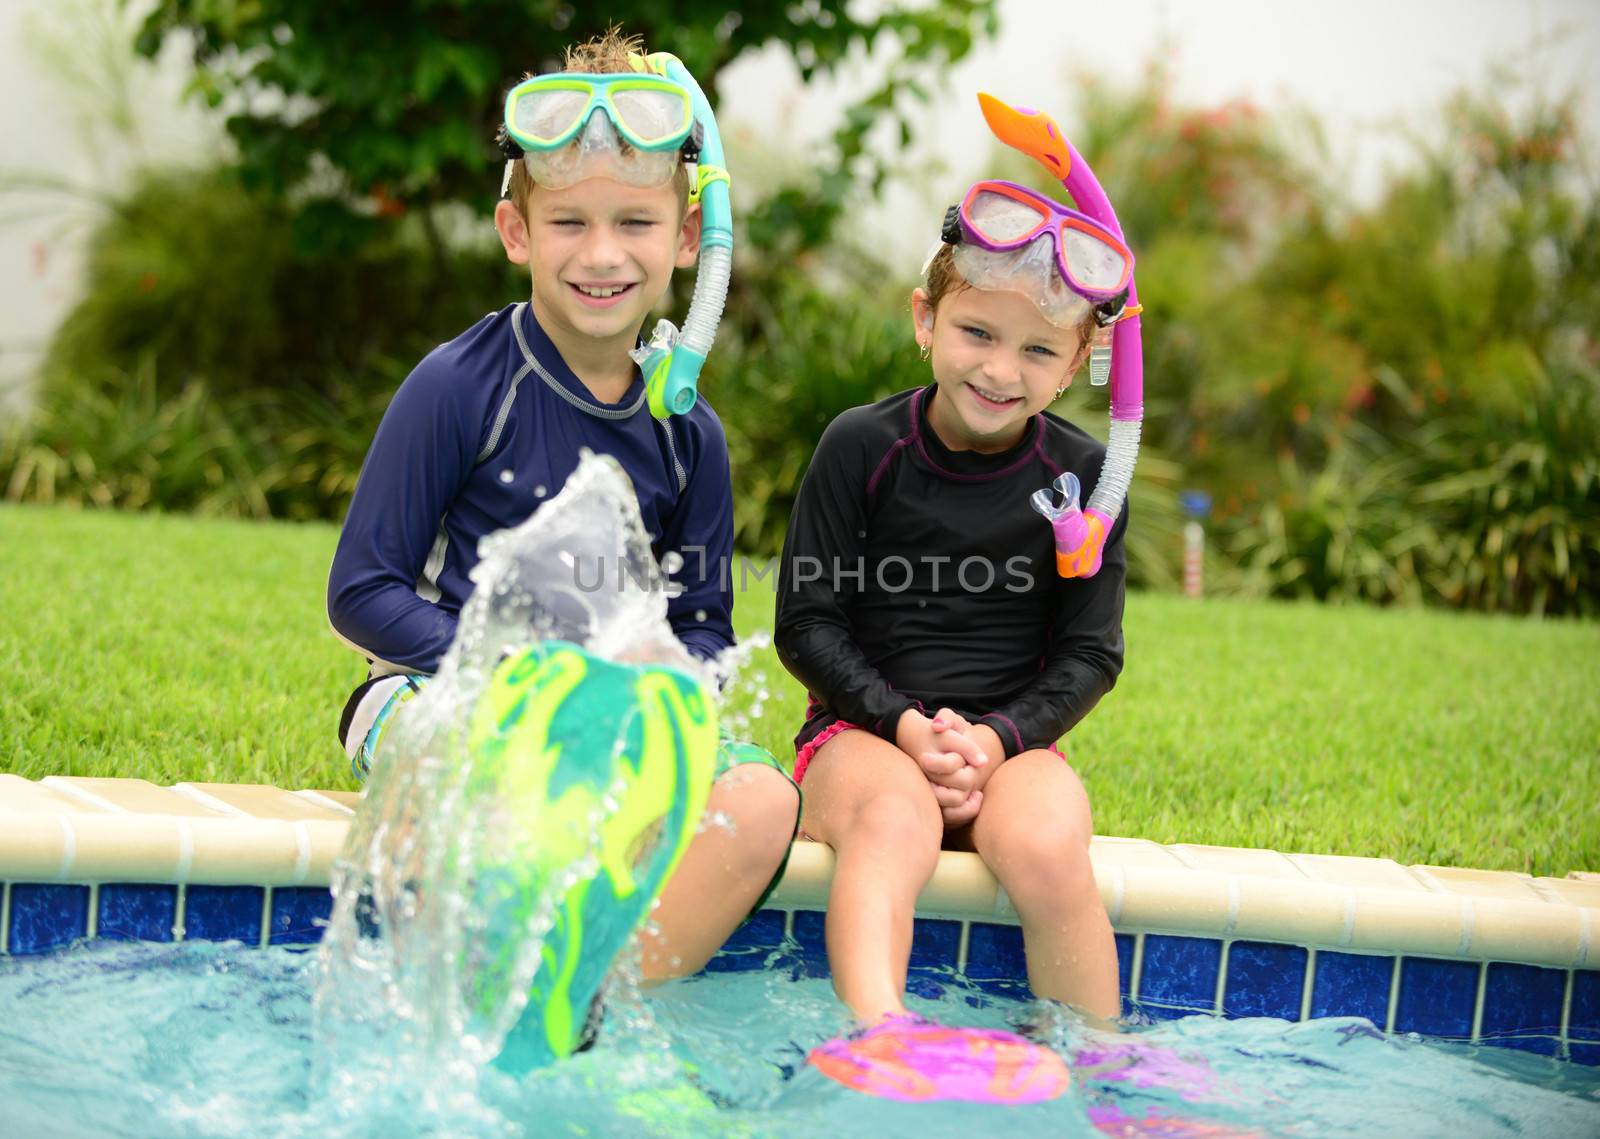 two children splashing water with swimming fins in pool